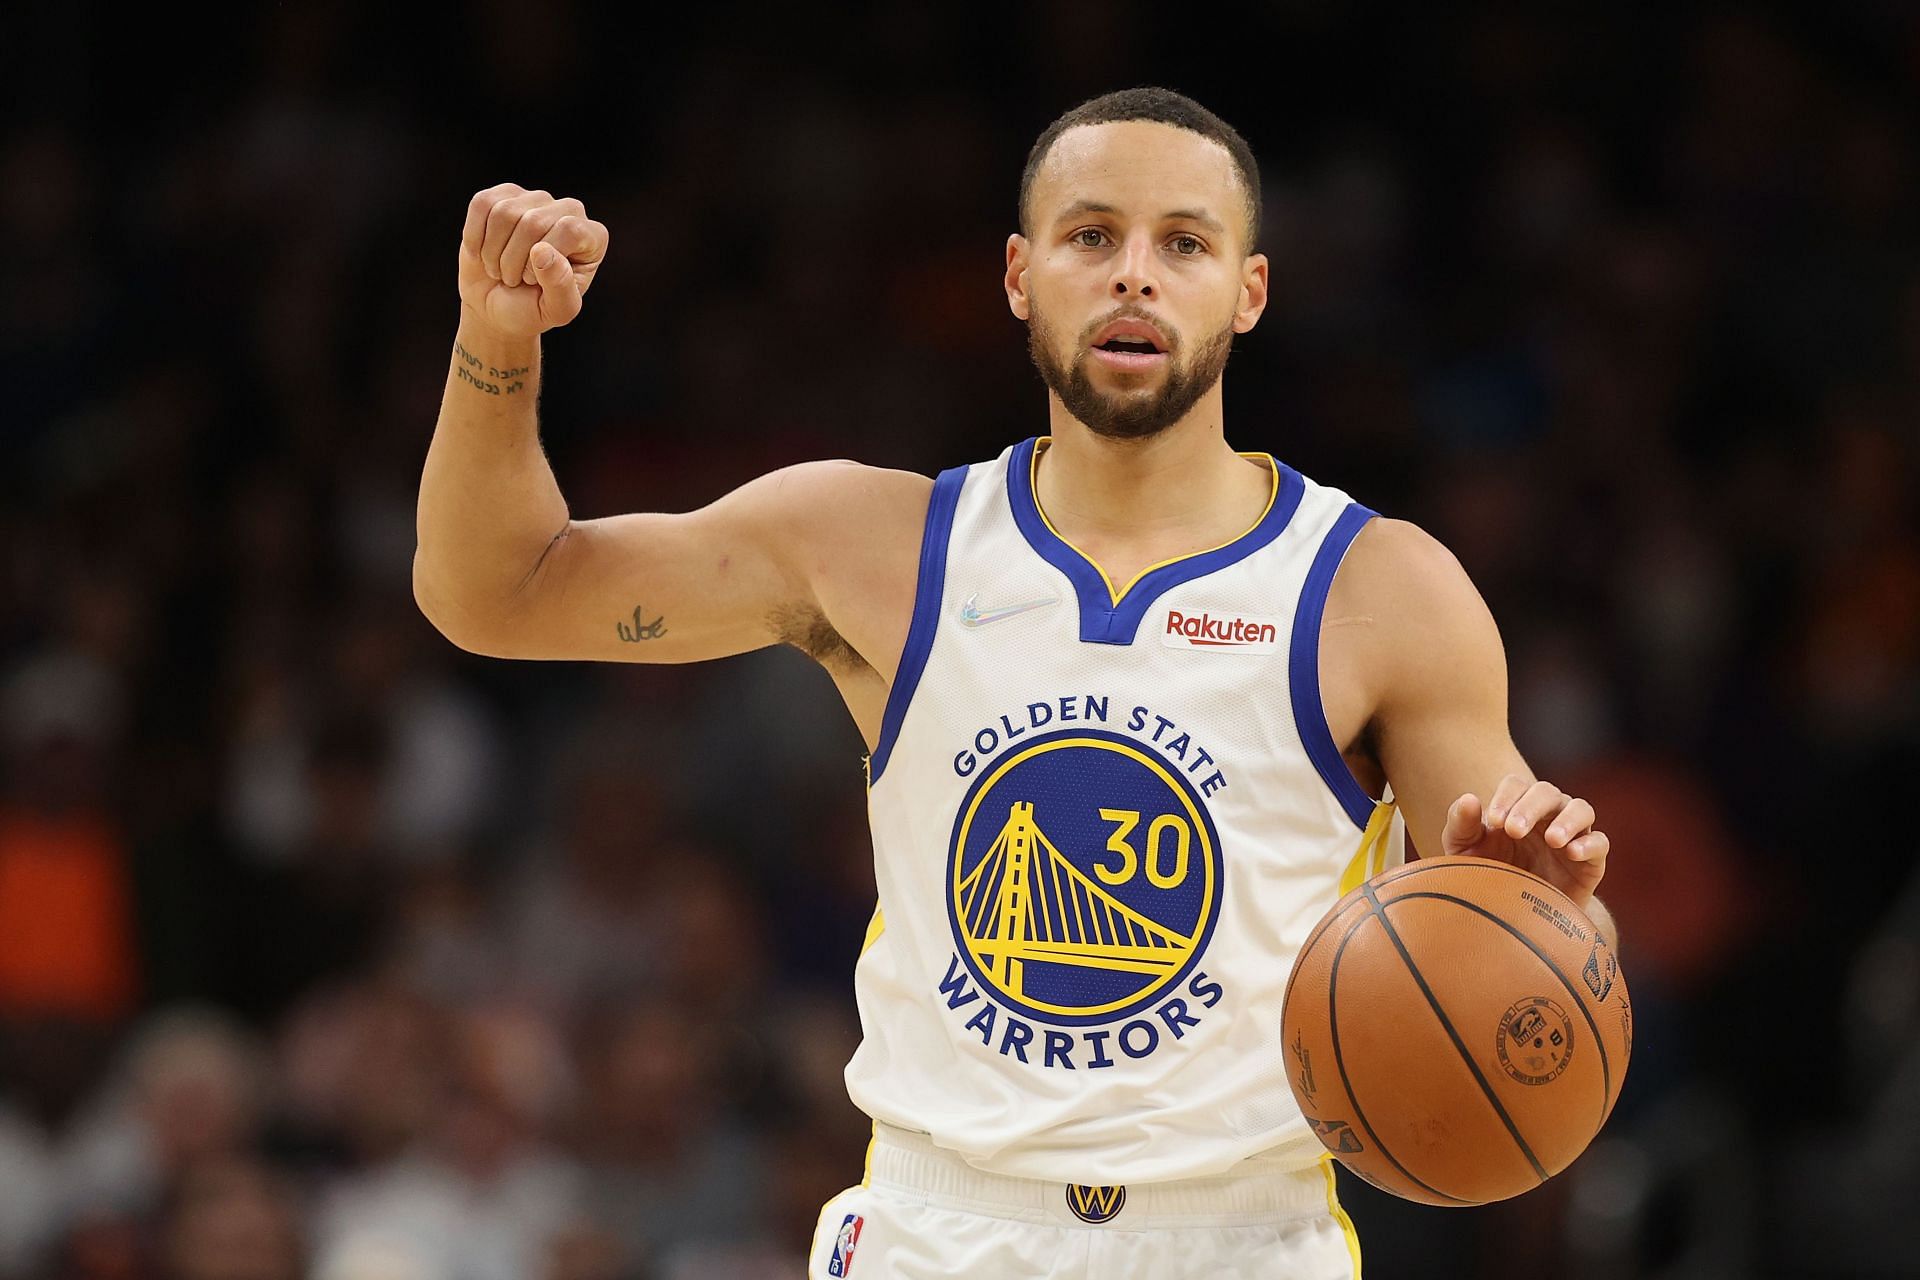 Stephen Curry closes in on 3s record as Warriors top Blazers